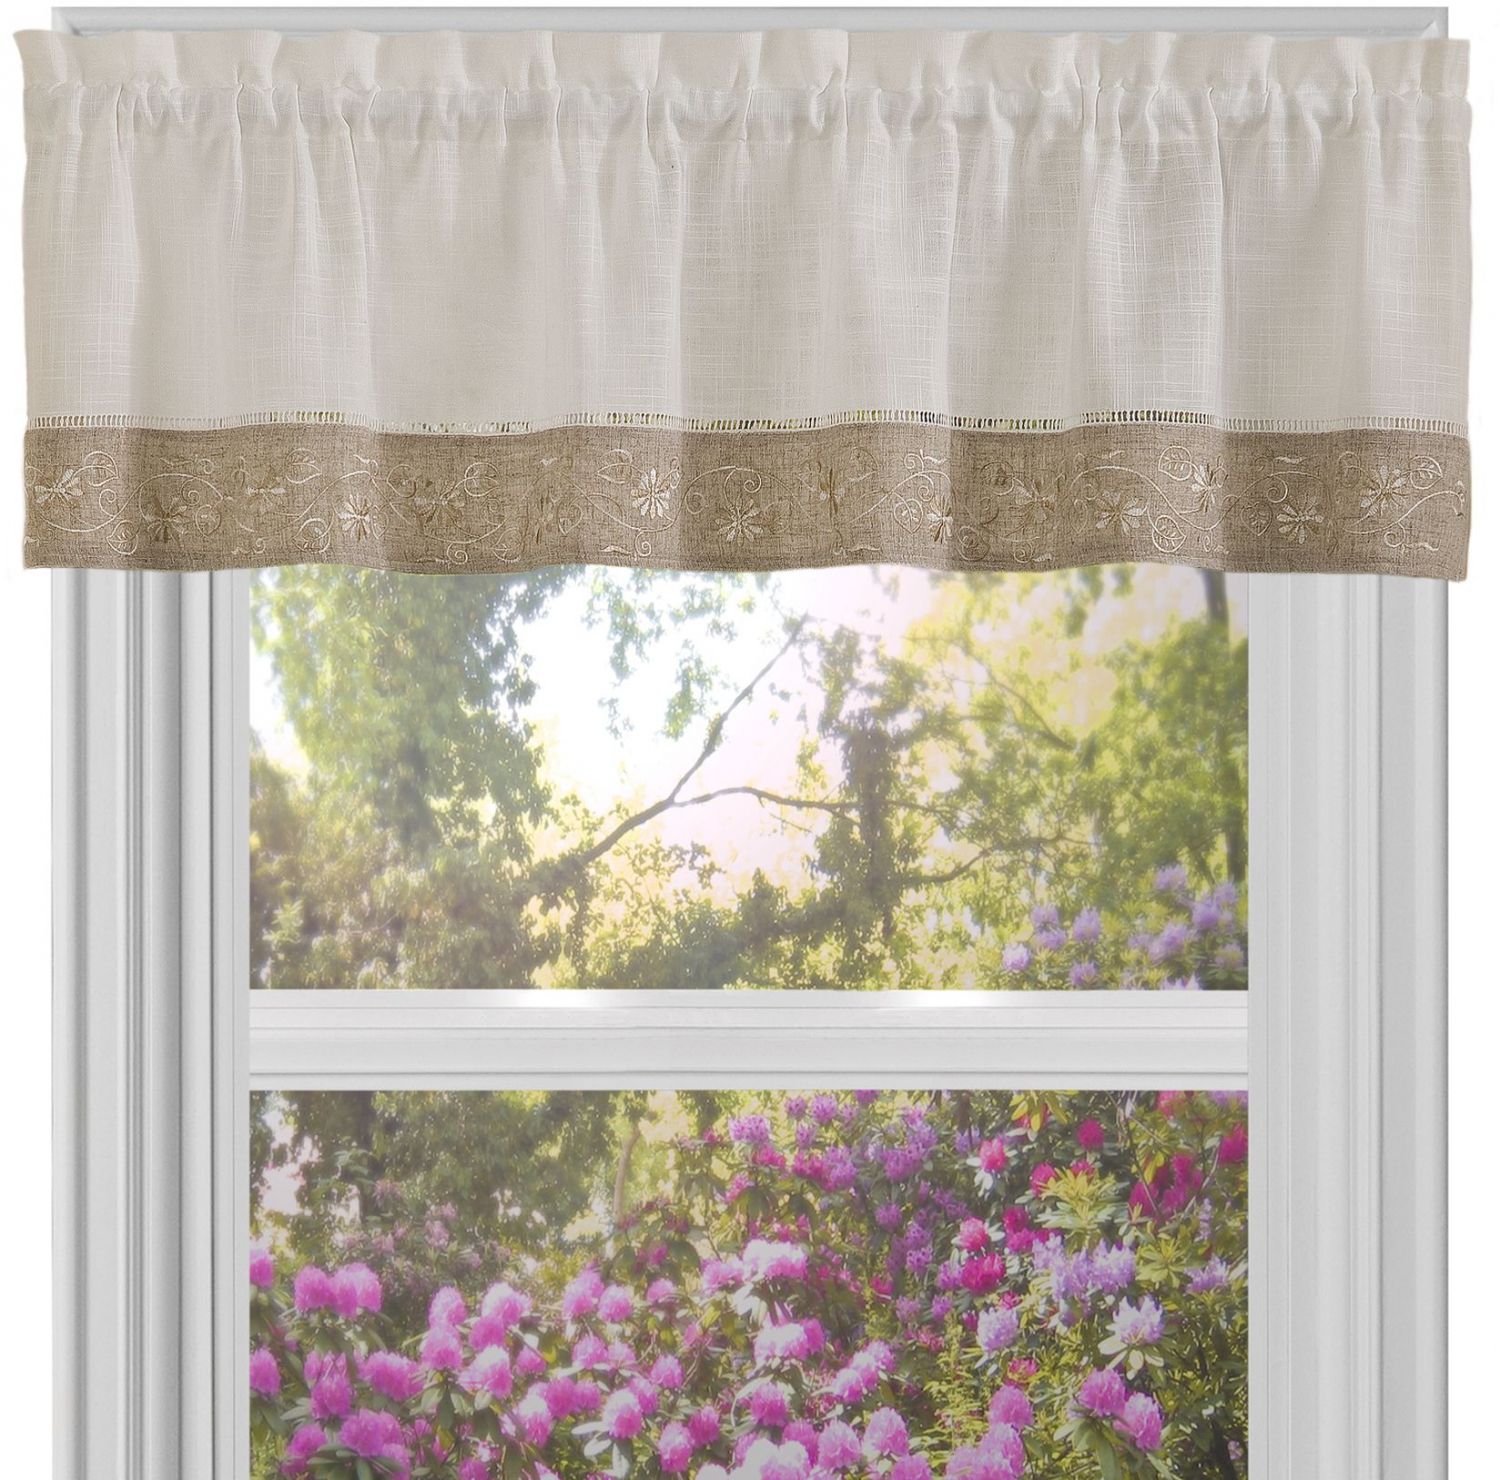 Details About Achim Oakwood Valance Natural W/ Monochromatic Floral  Embroidery Tailored Linen Intended For Tailored Toppers With Valances (View 20 of 20)